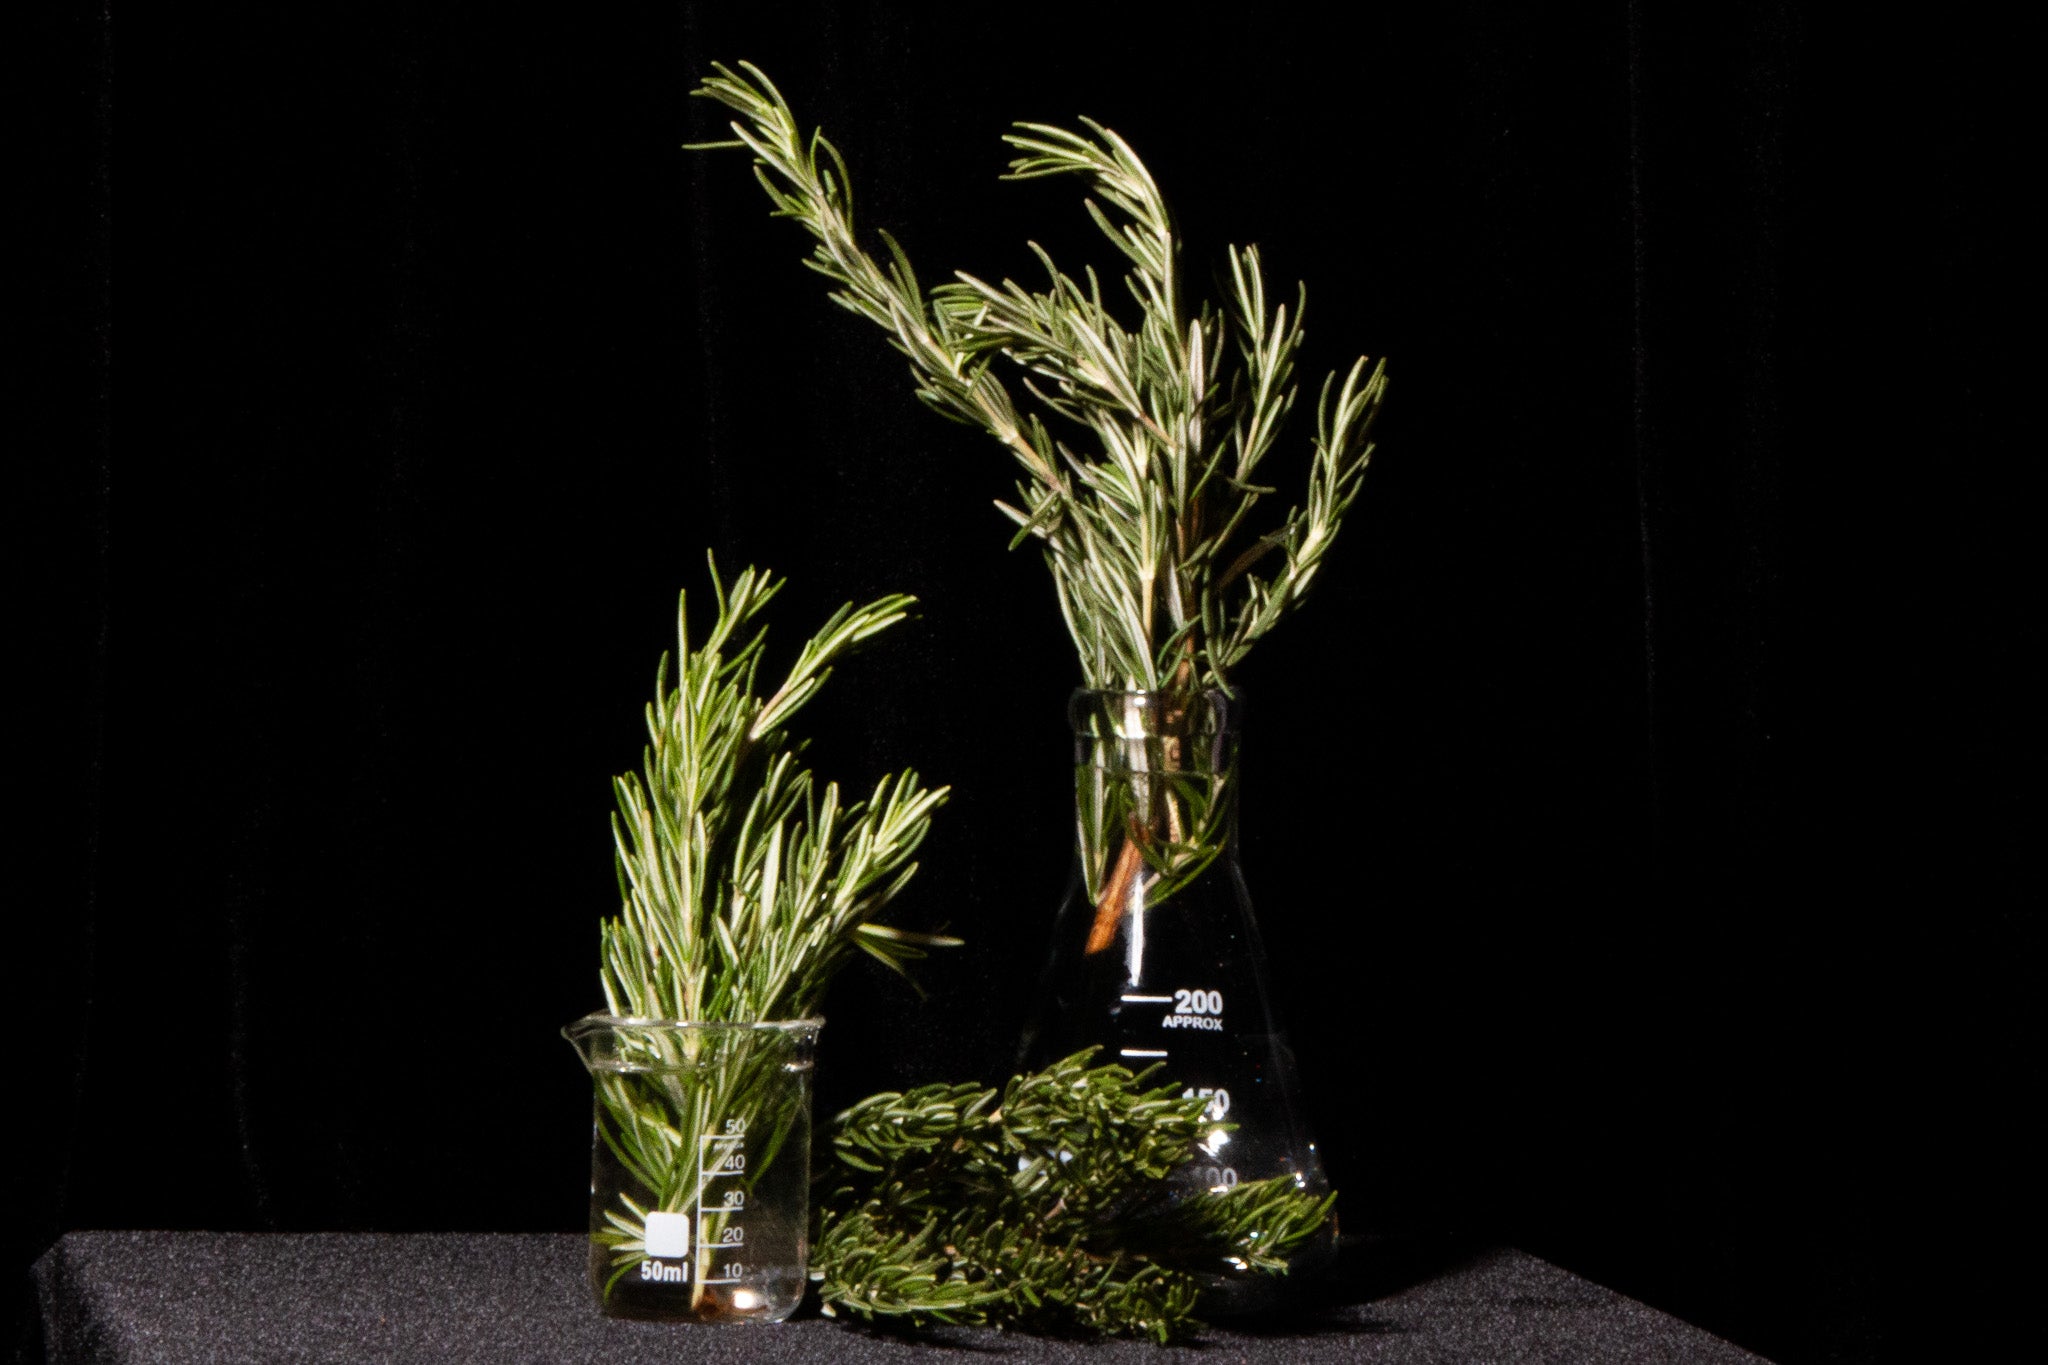 Two glass beakers of different sizes containing sprigs of rosemary, with an additional sprig of rosemary lying on the table between them.